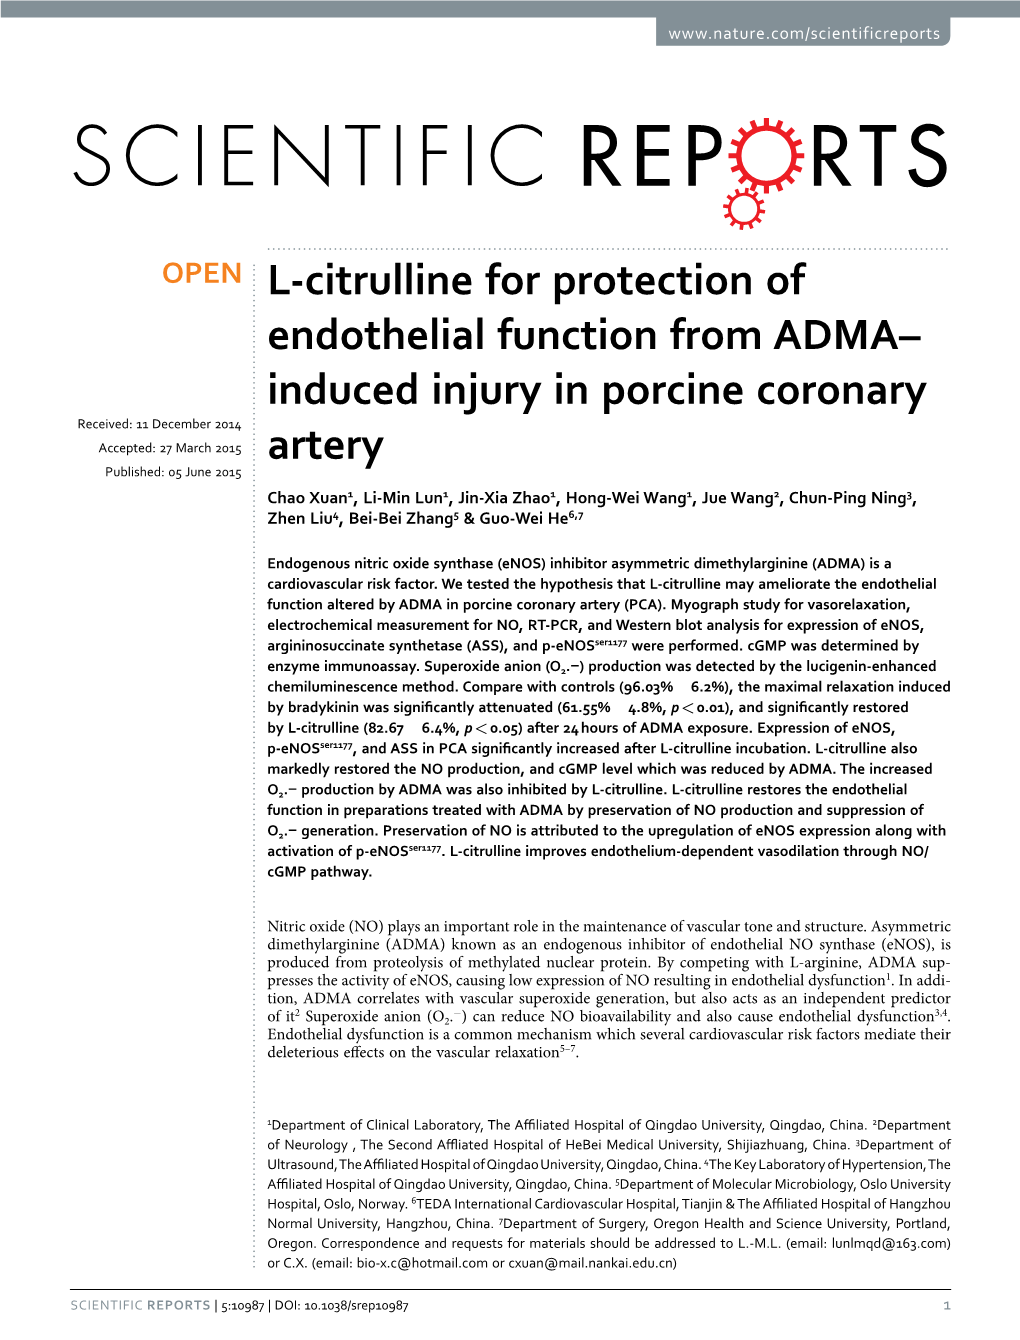 L-Citrulline for Protection of Endothelial Function from ADMA–Induced Injury in Porcine Coronary Artery